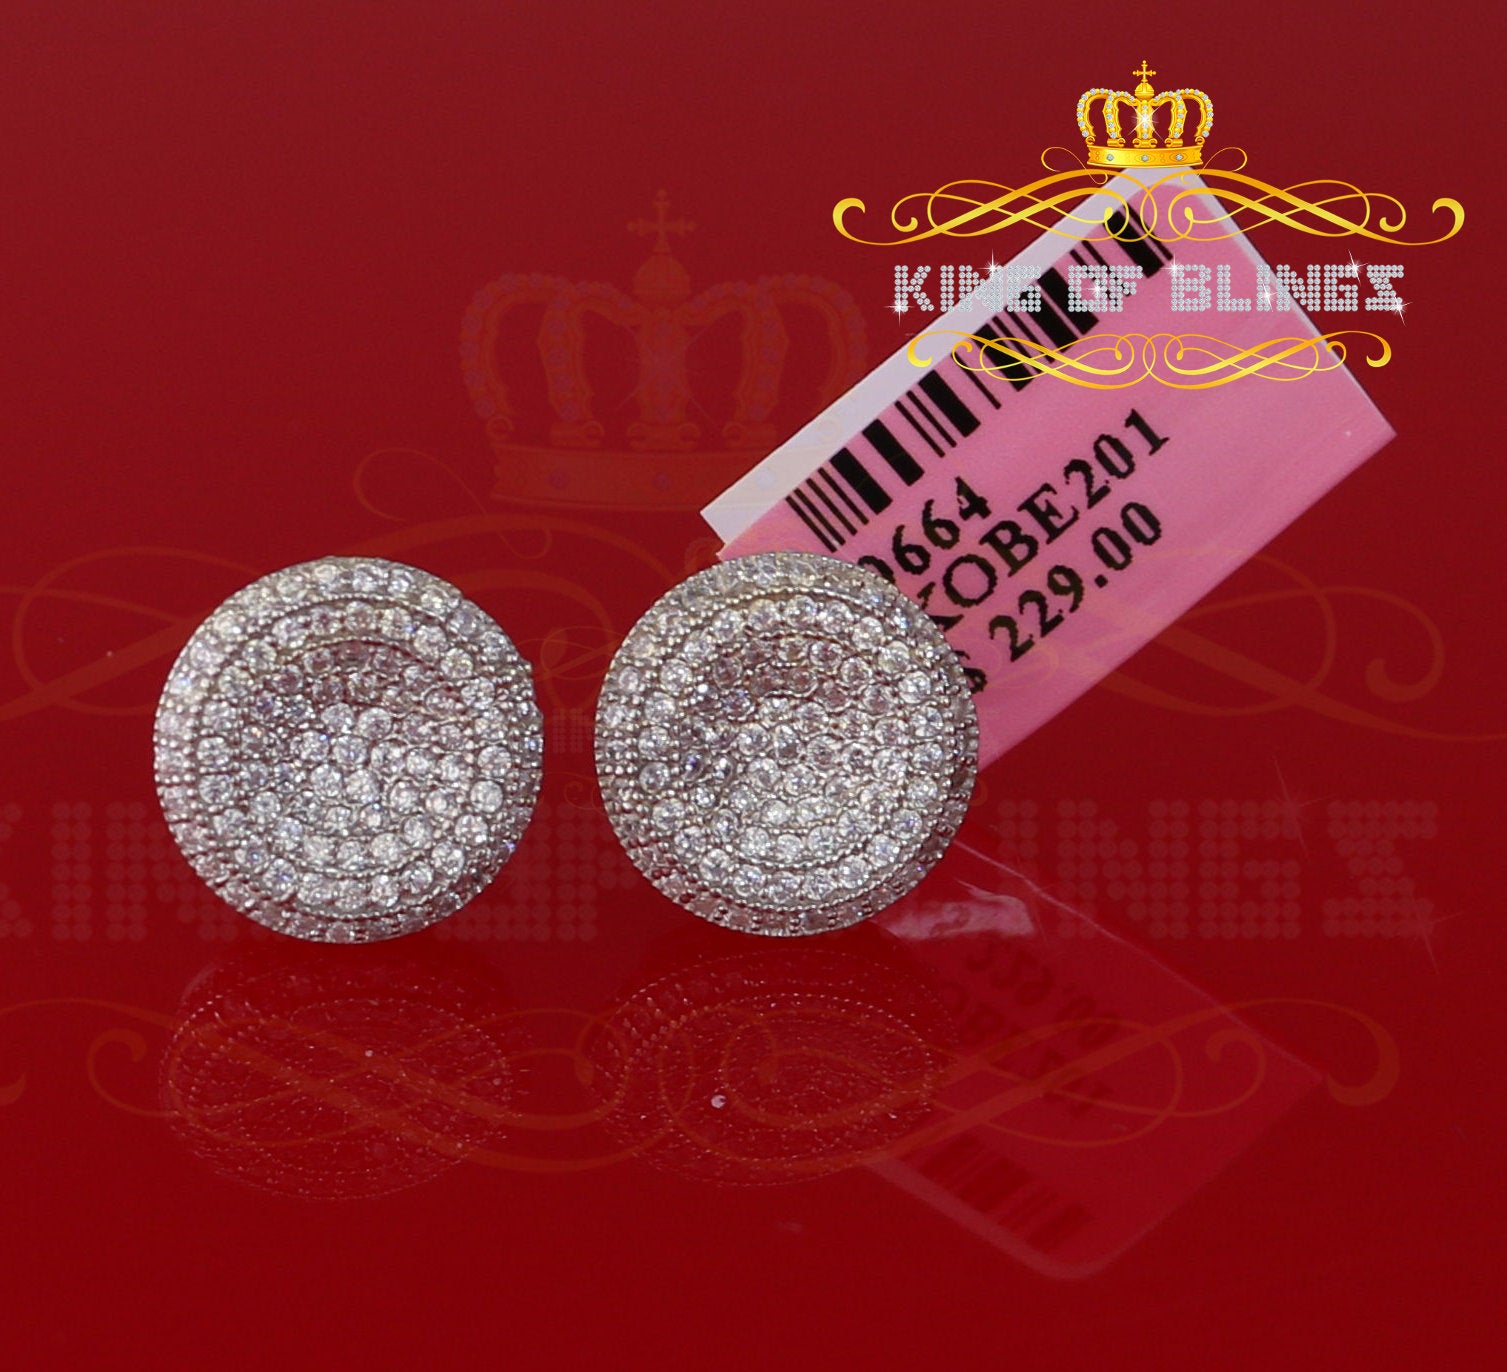 King of Blings- Aretes Para Hombre 925 White Silver 1.94ct Cubic Zirconia Round Women's Earrings KING OF BLINGS